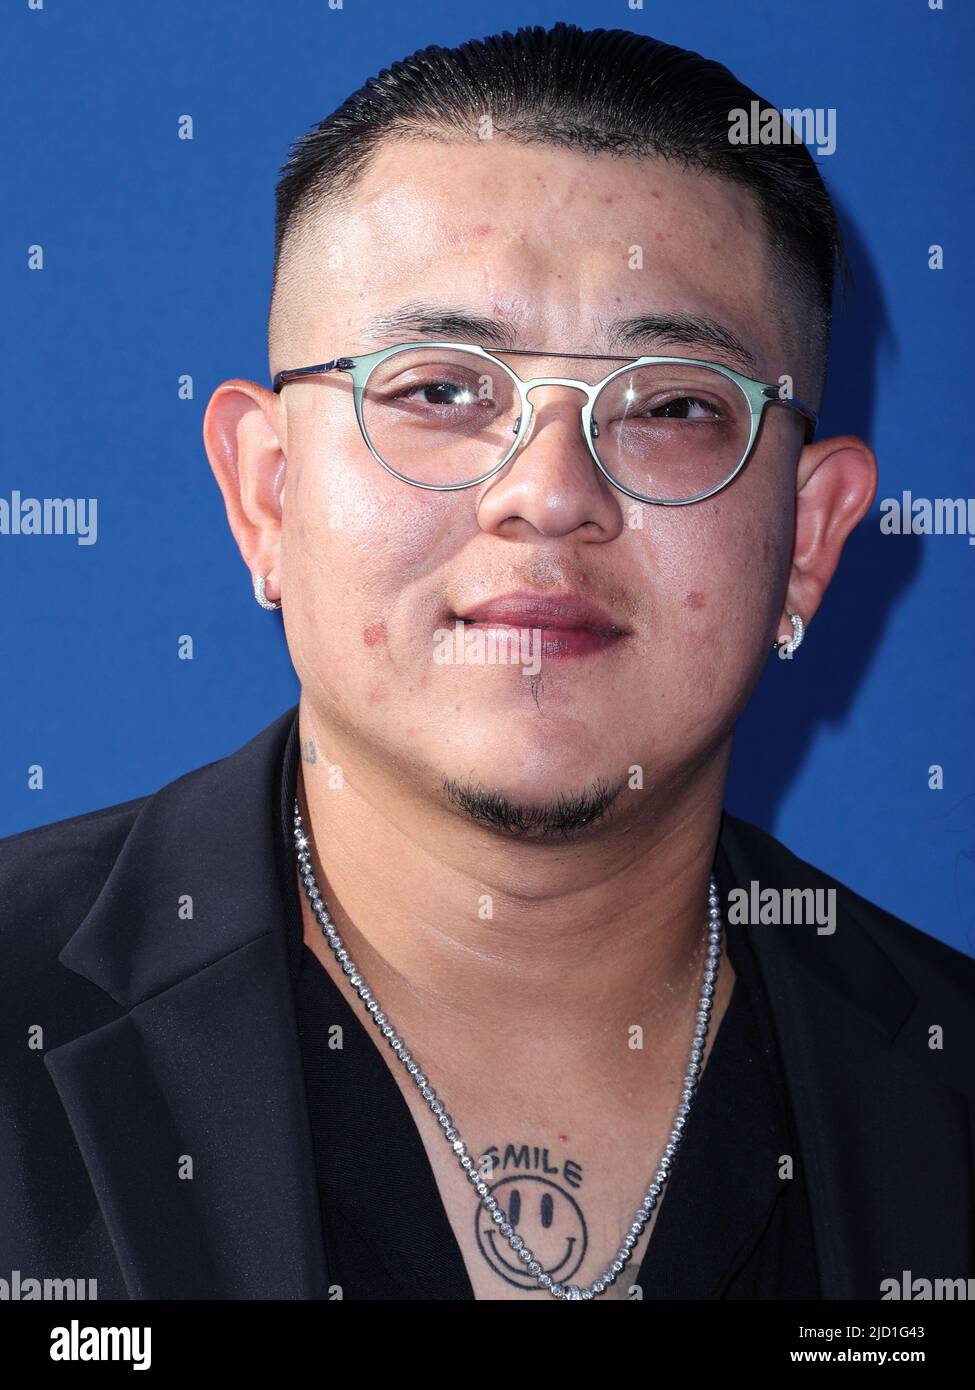 Los Angeles, United States. 16th June, 2022. LOS ANGELES, CALIFORNIA, USA -  JUNE 16: Mexican professional baseball pitcher Julio Ur'as (Julio Urias)  arrives at the Los Angeles Dodgers Foundation (LADF) Annual Blue